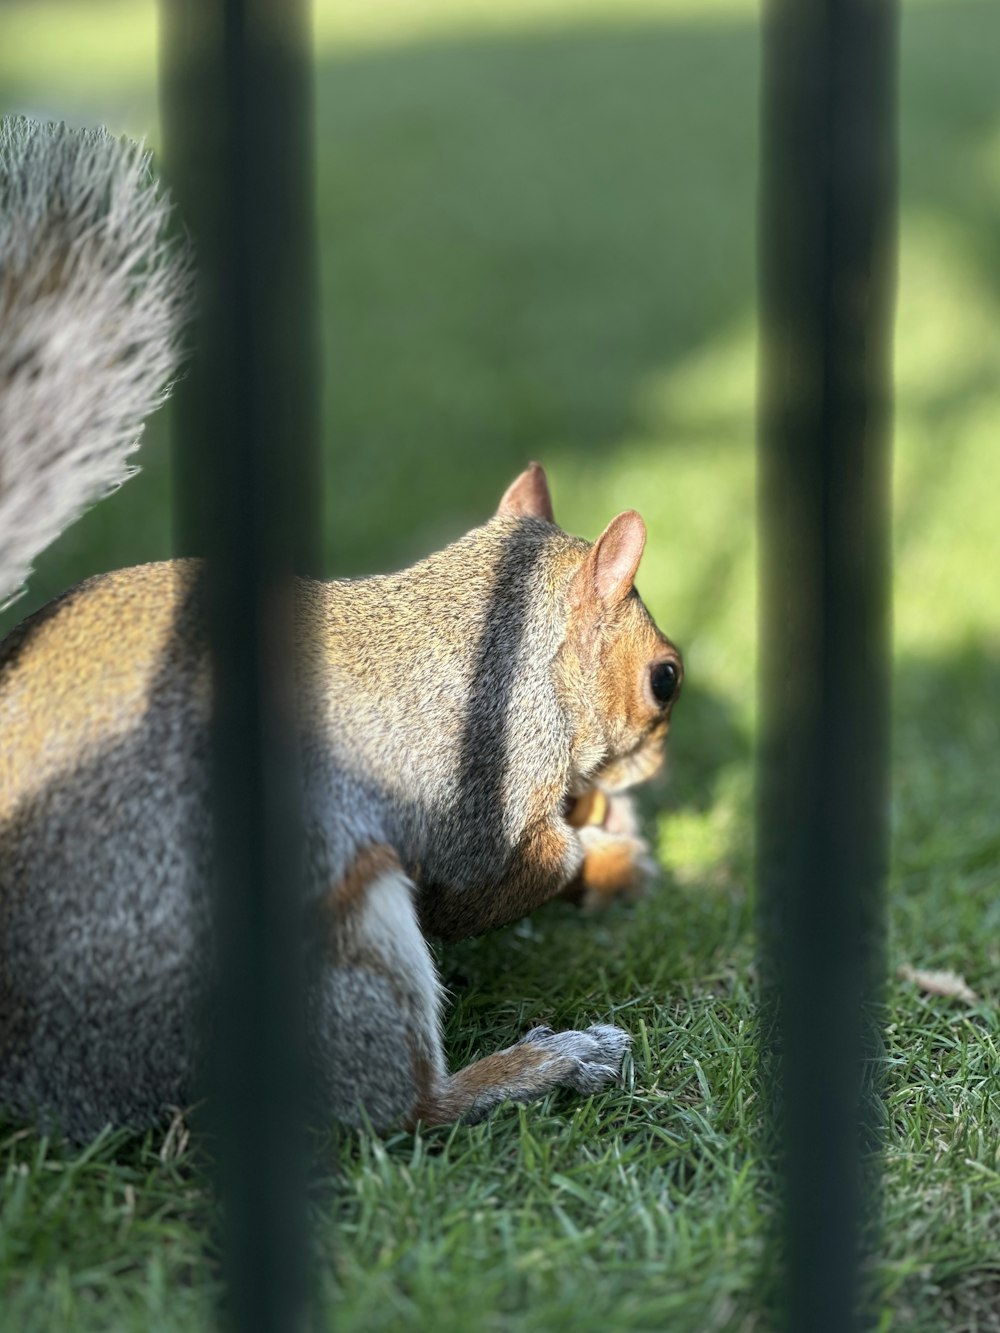 a squirrel sitting in the grass behind a fence